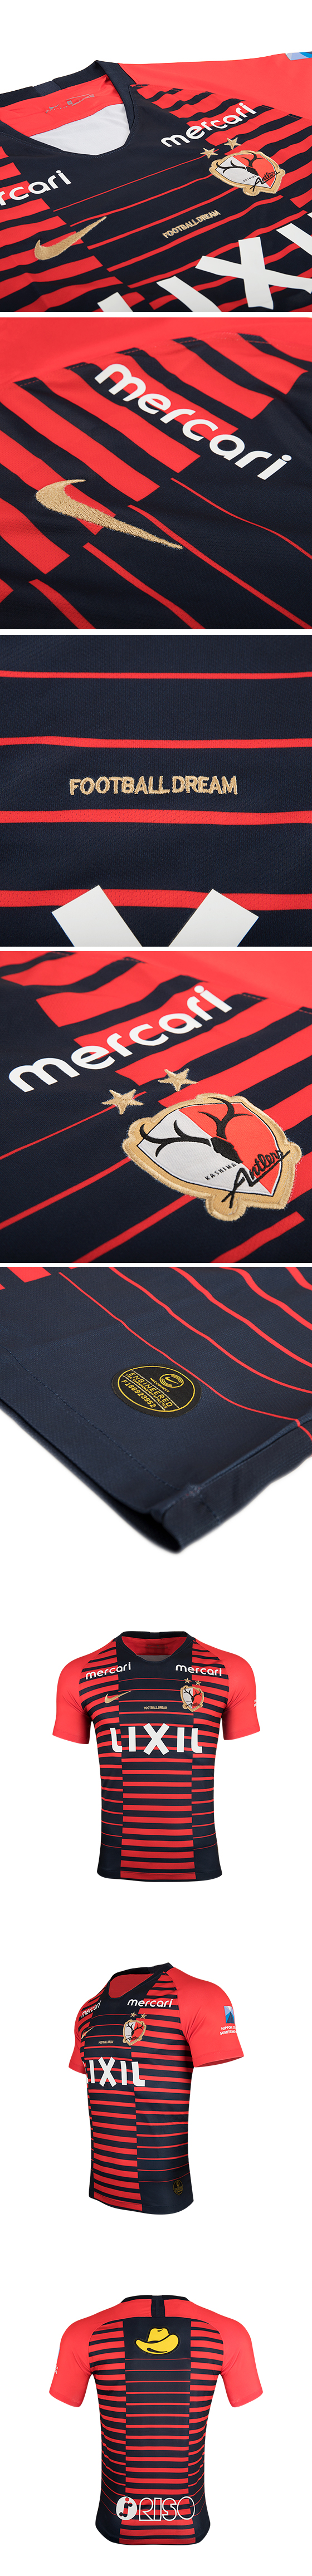 Cheap Kashima Antlers Home 2019-20 Soccer Jersey Shirt - Click Image to Close